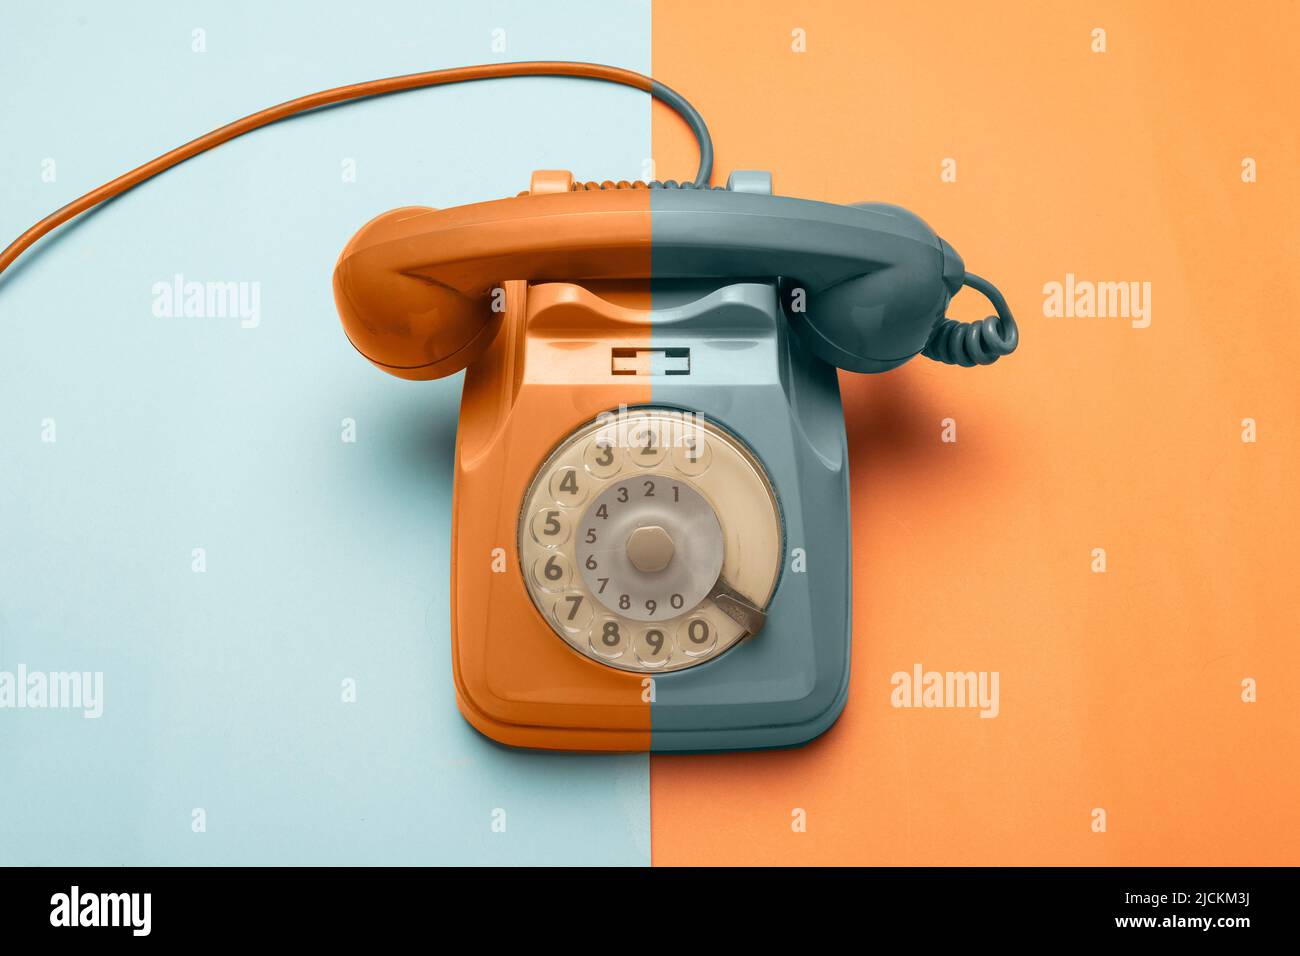 Teal and orange retro disk telephone on teal and orange background Stock Photo